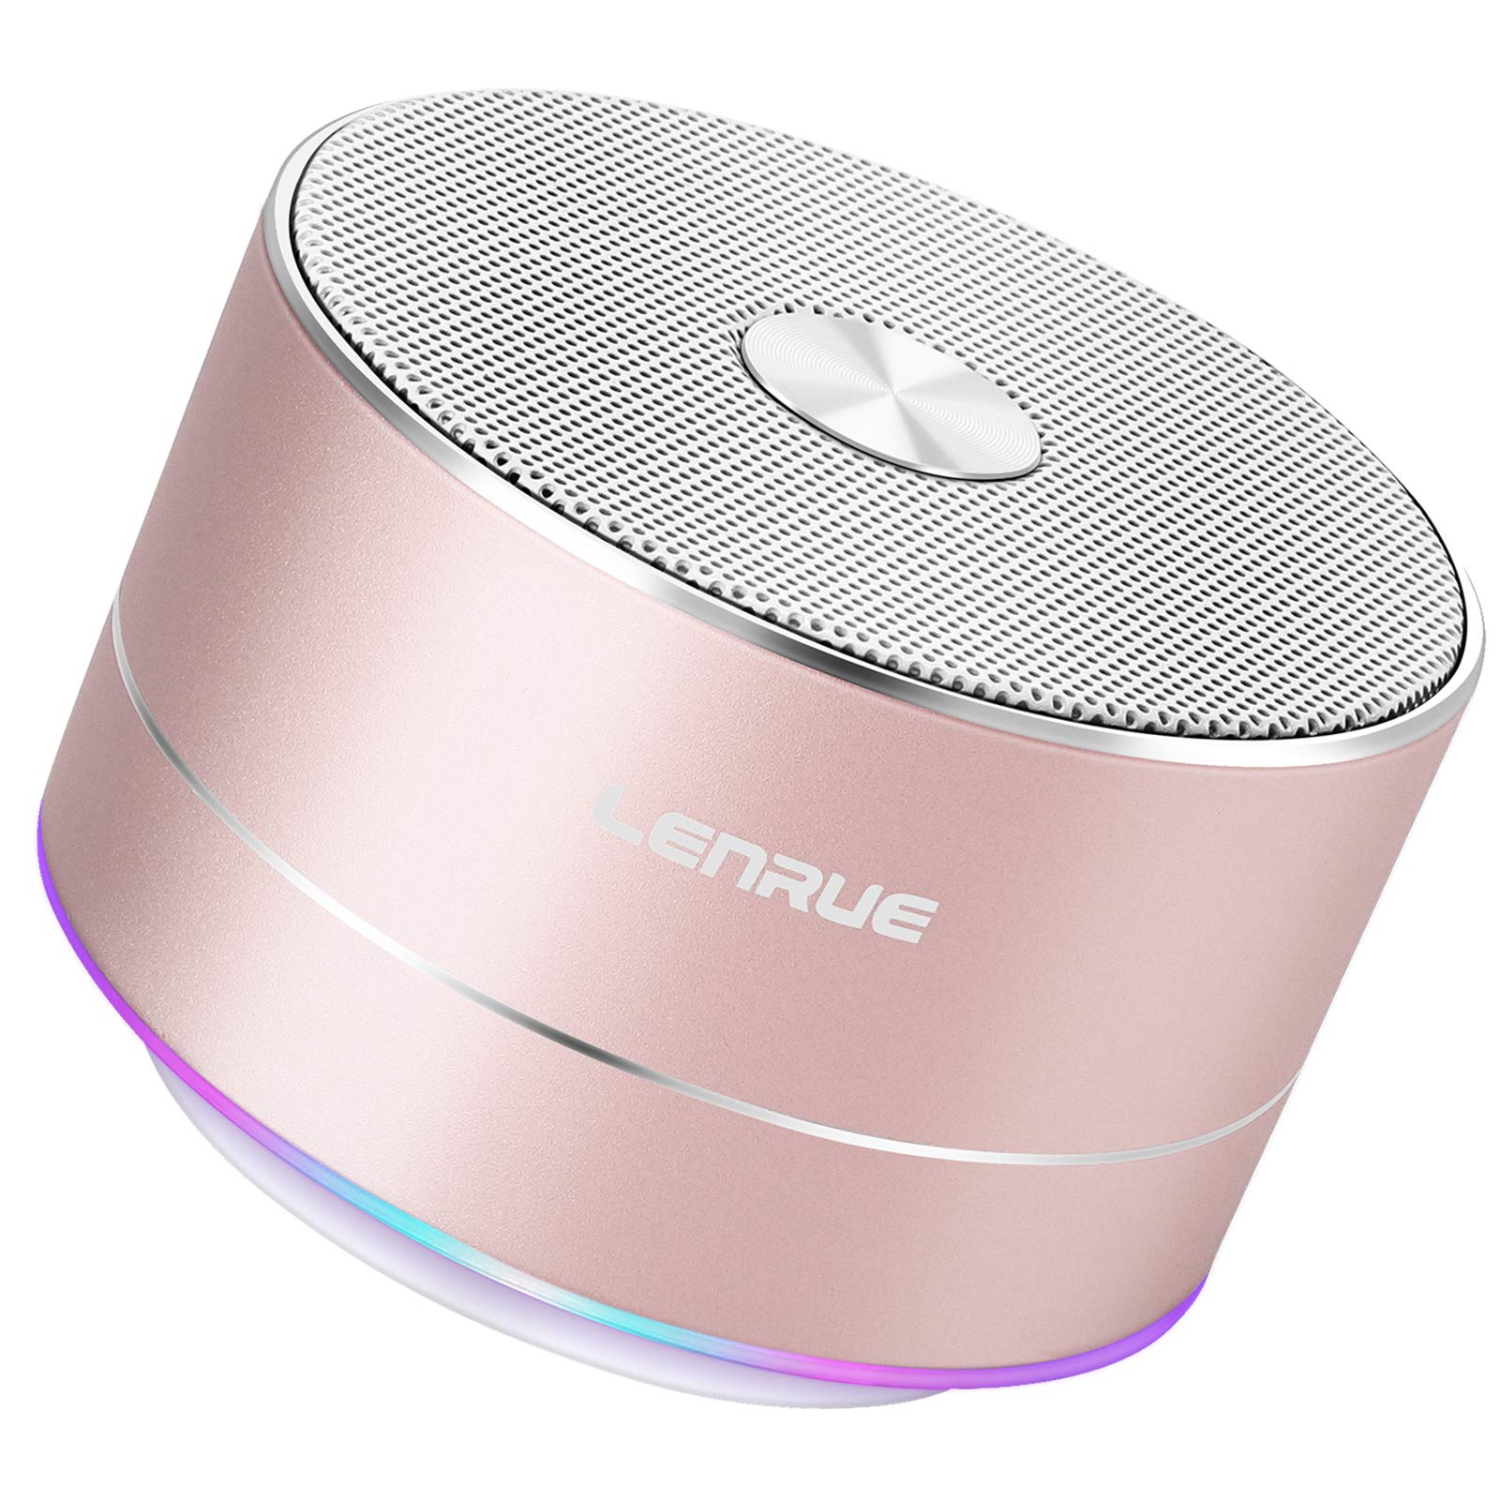 Portable Wireless Bluetooth Speaker with Built-in-Mic,Handsfree Call,AUX Line,TF Card,HD Sound and Bass for iPhone Ipad Android Smartphone and More(Rose Gold)